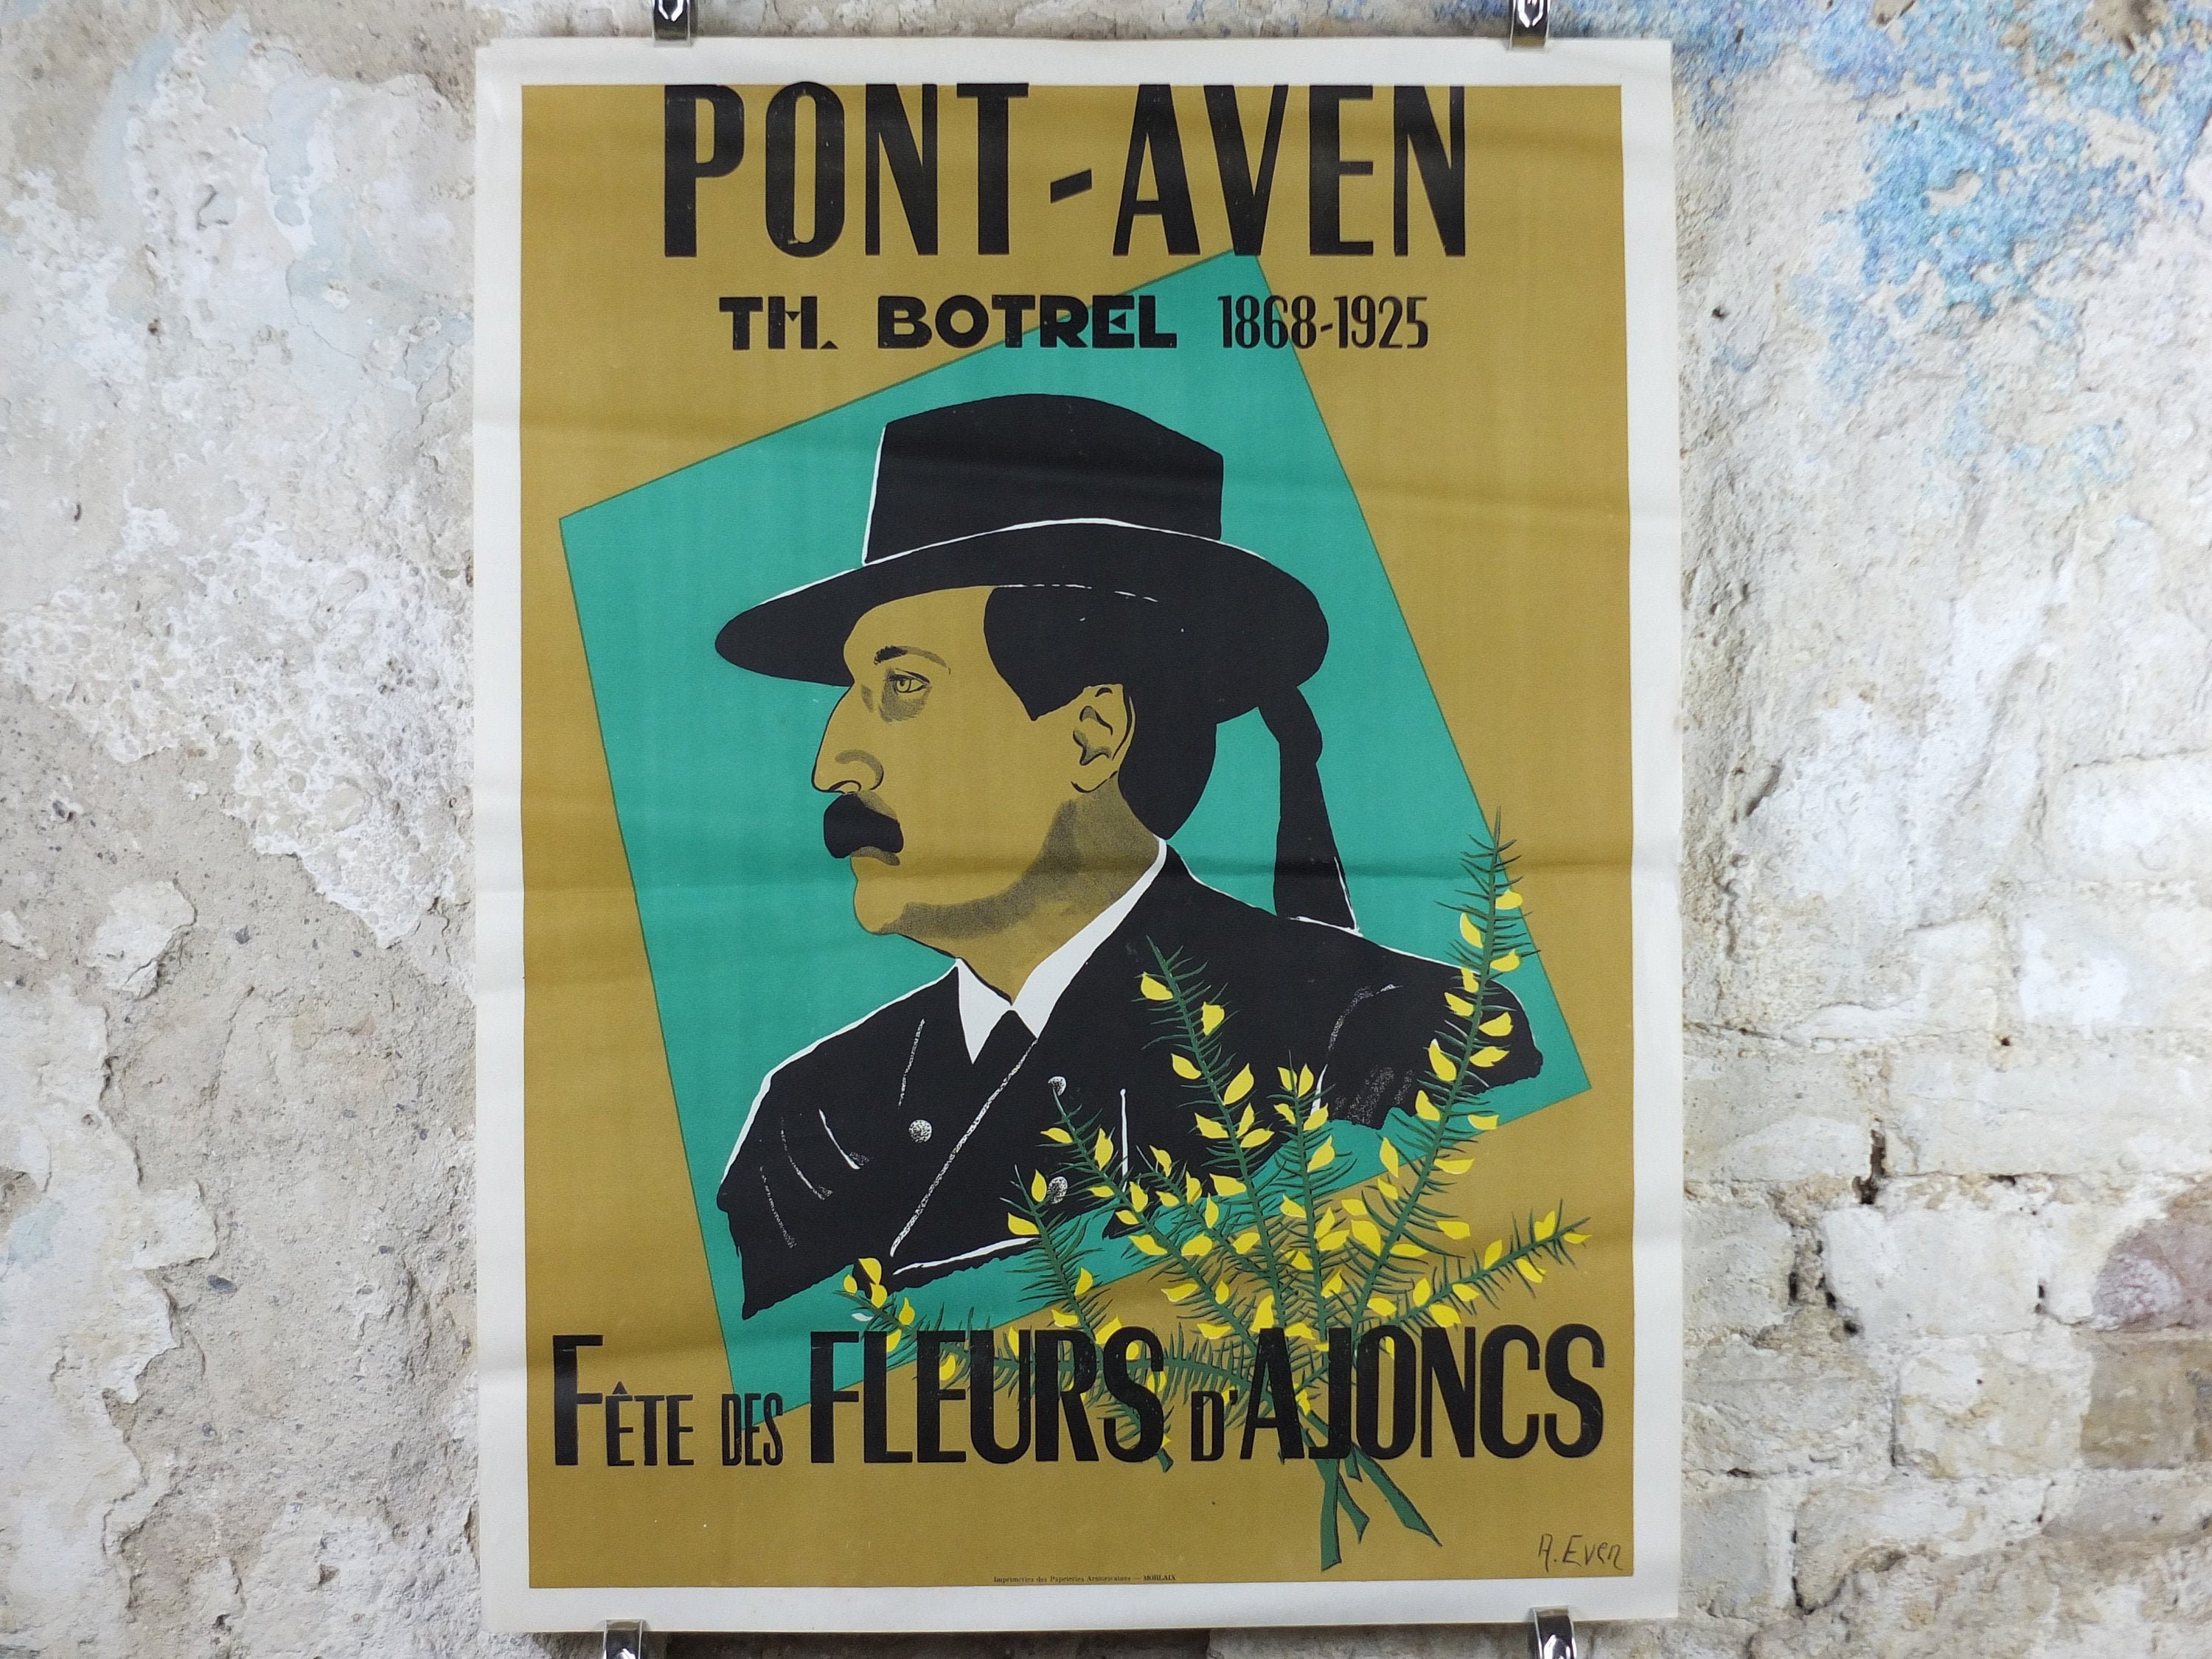 1950s Fete des Fleurs d'Ajoncs Poster, from Pont Avon, an Andre Even poster of Théodore Botrel, French singer and poet, wall art decor